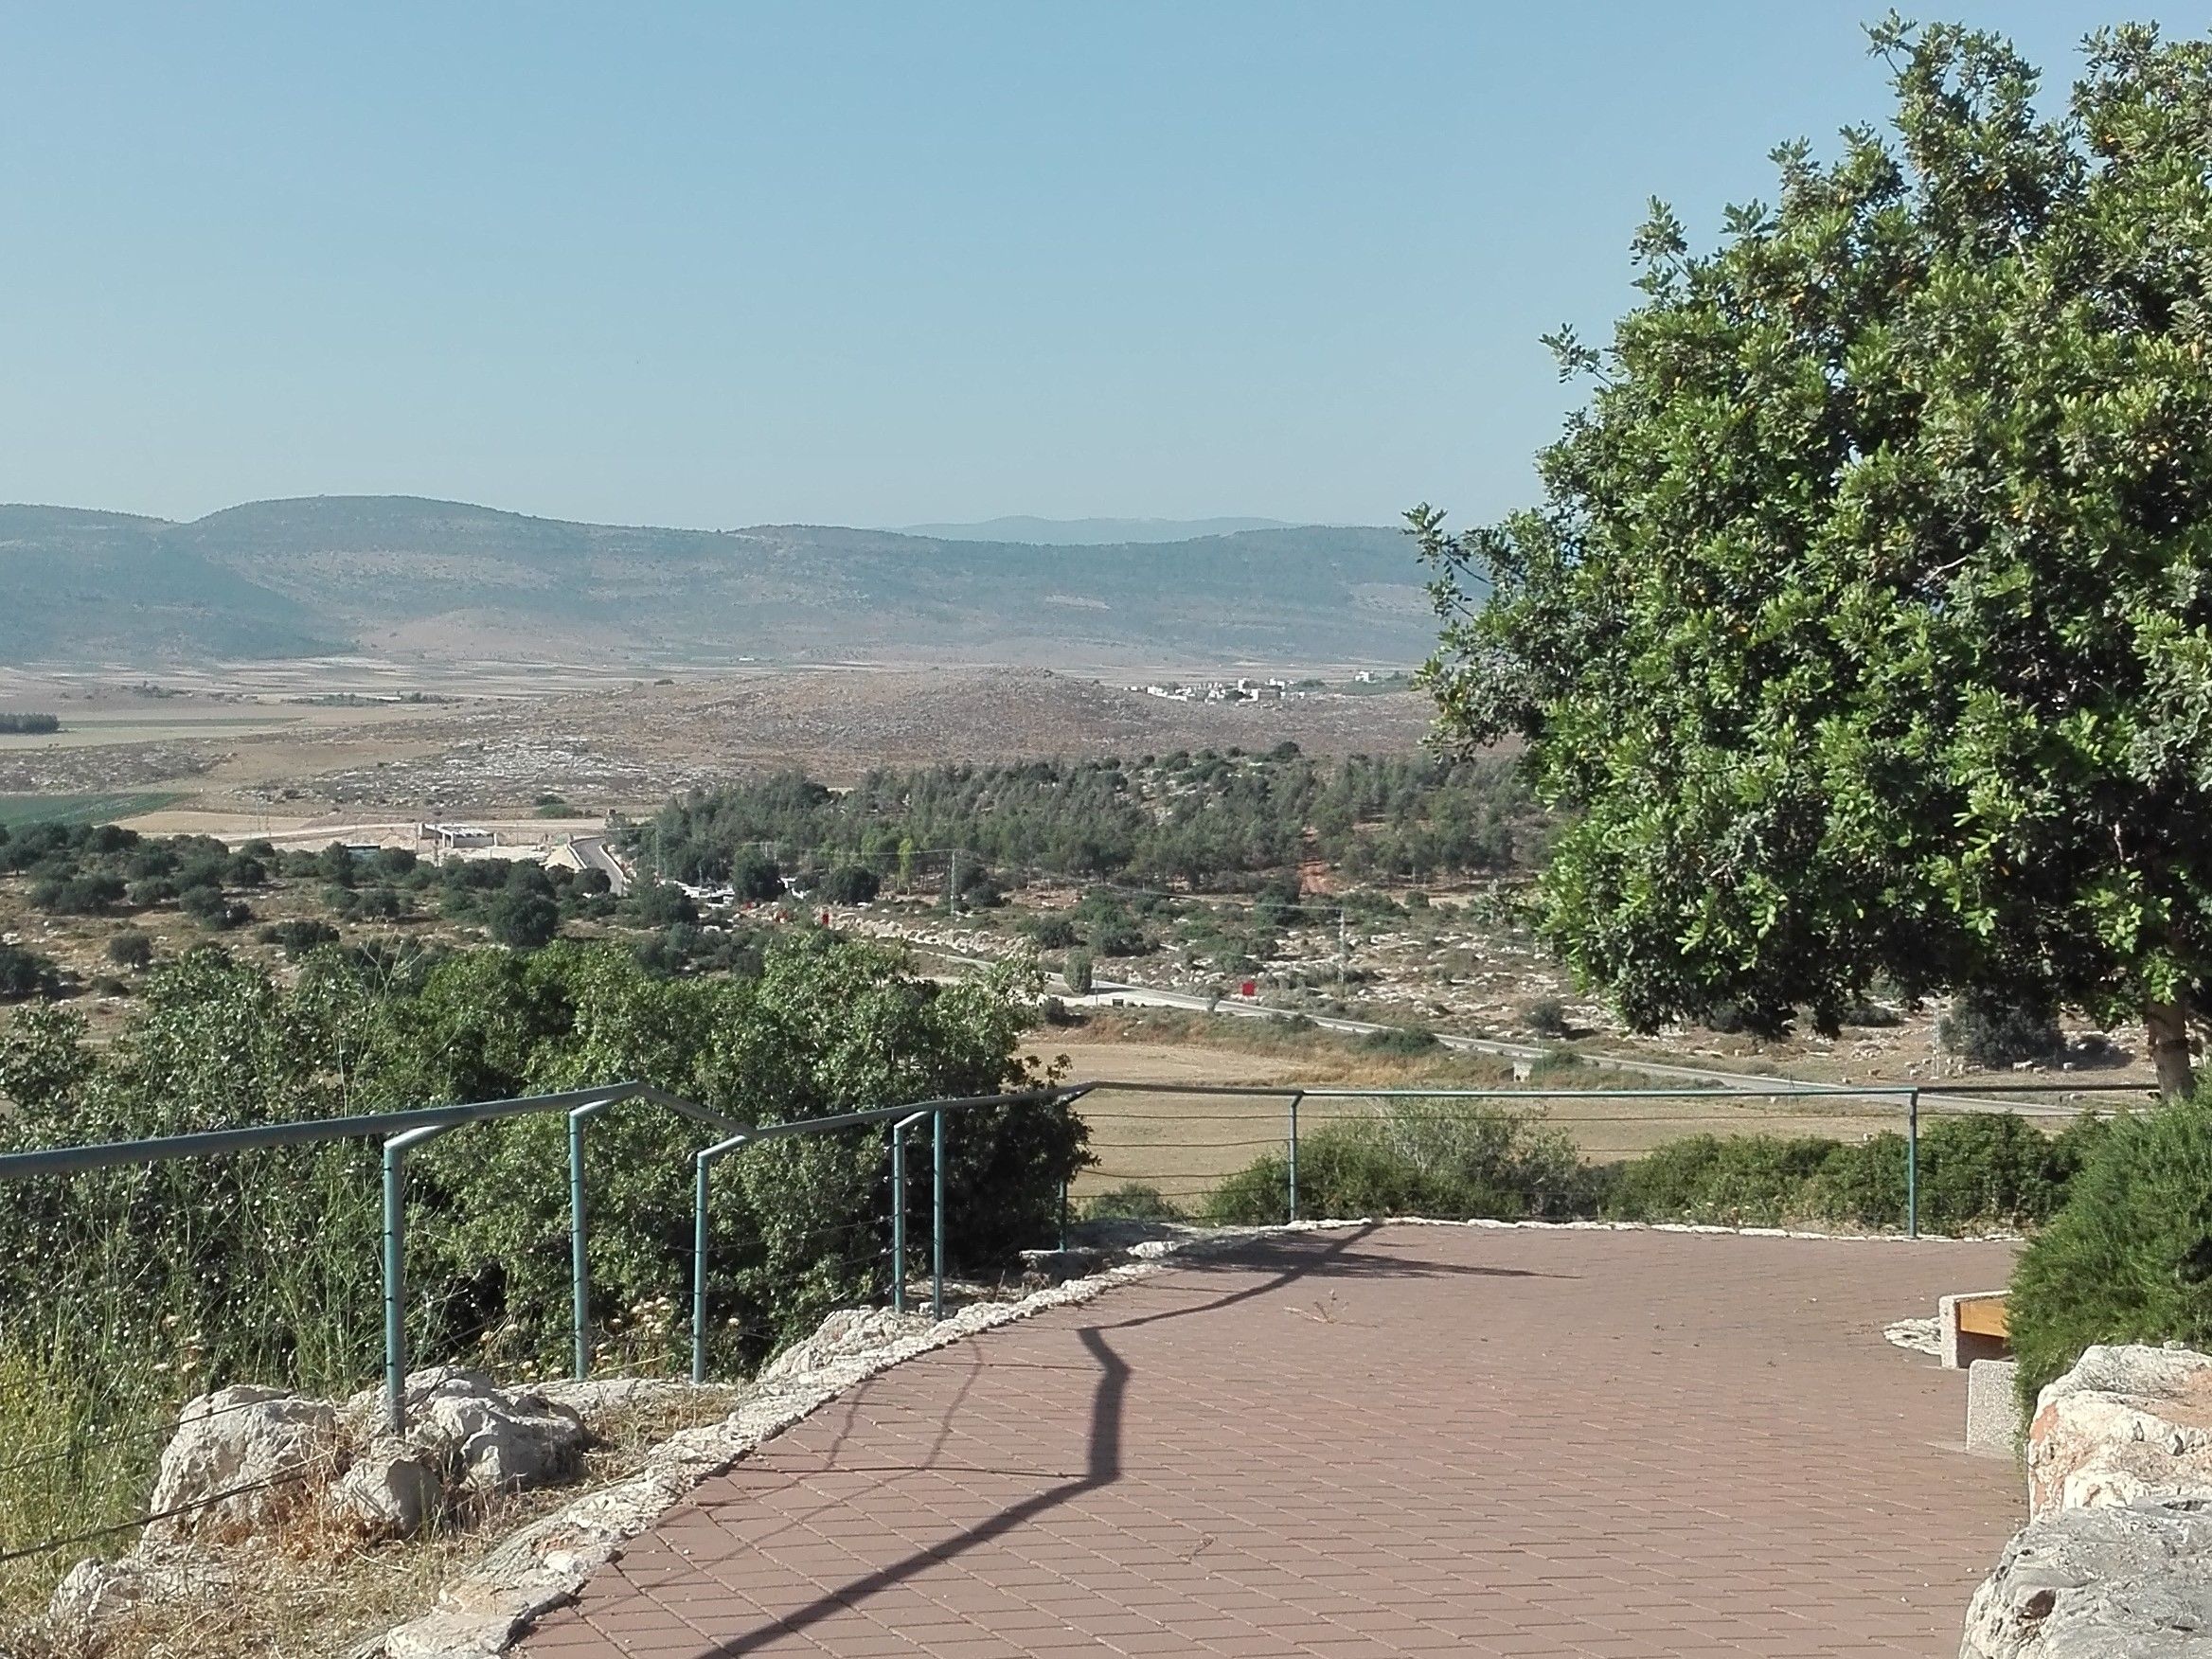 The view from Hoshaya, a religious-Zionist community in northern Israel where part of Abraham Segal's family lives today. Image by Tomasz Cebrat. Israel, 2017.